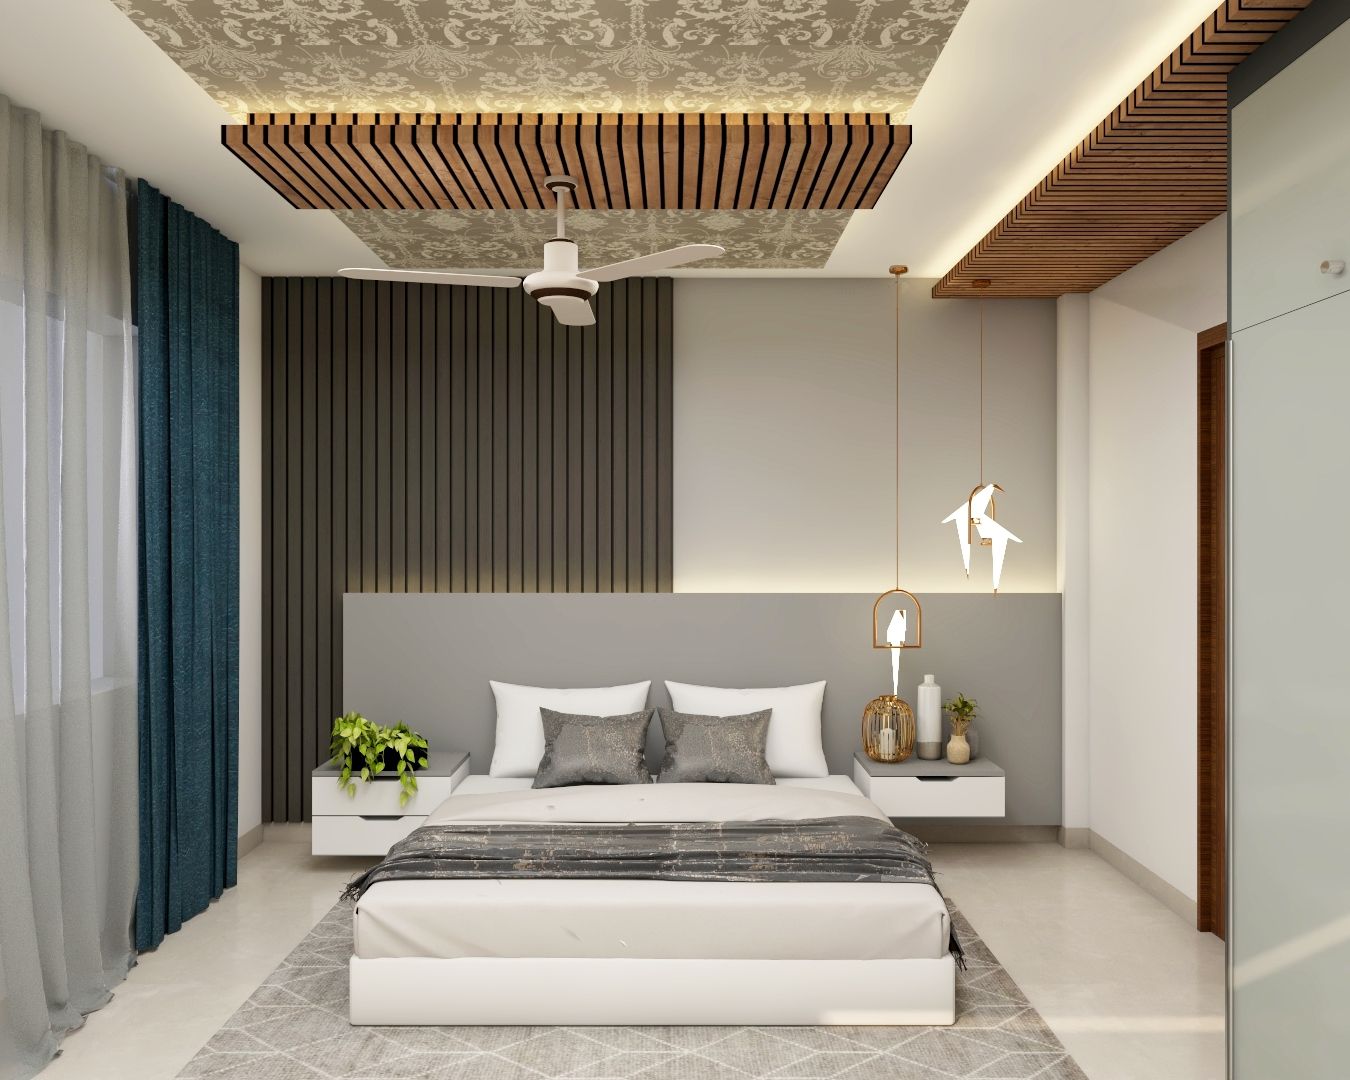 Contemporary Bedroom False Ceiling Design With Suspended Lights